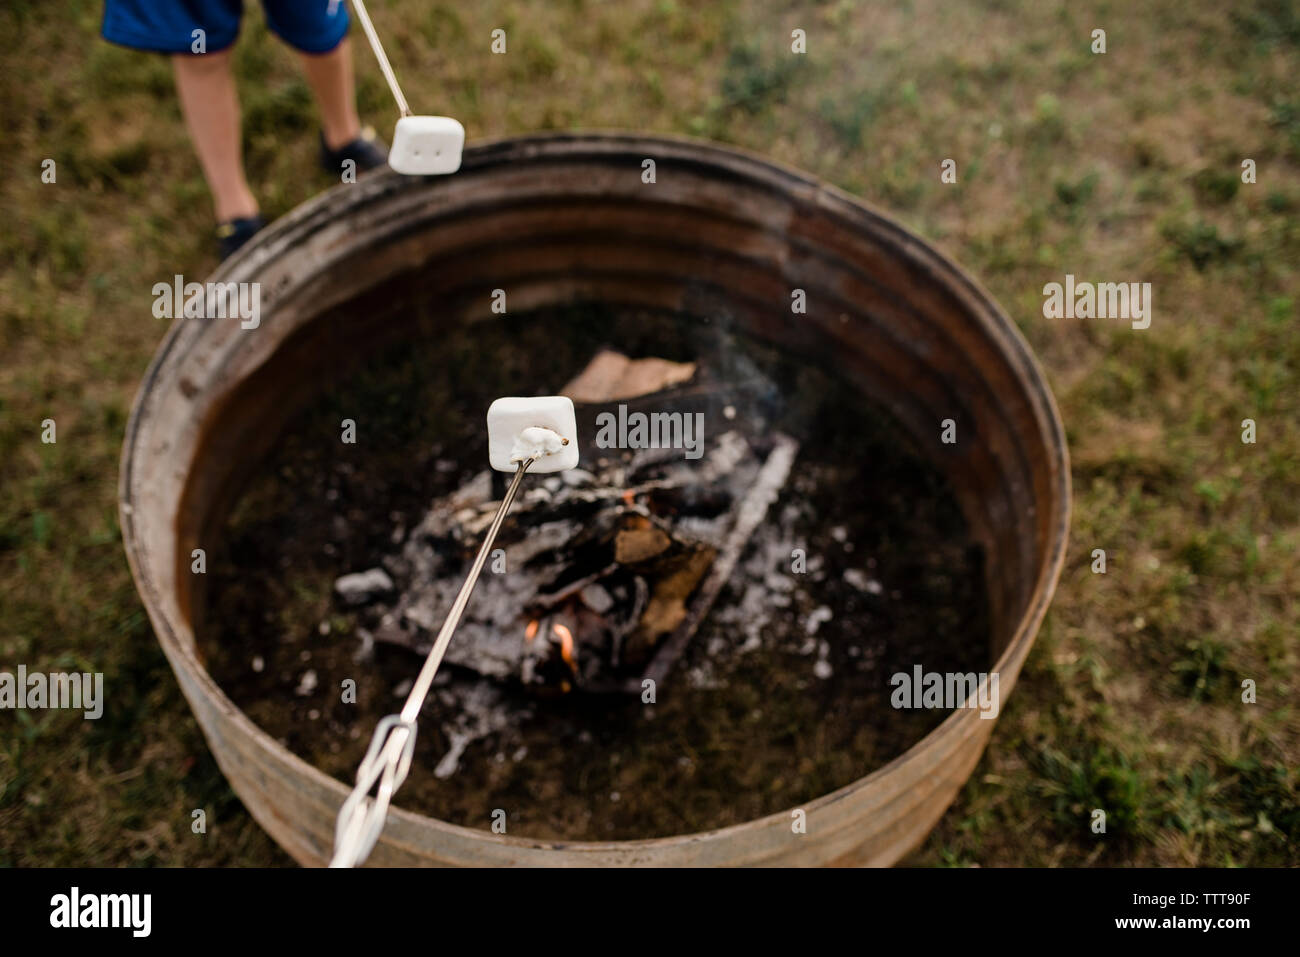 Low section of boy roasting marshmallow in skewer over fire pit at backyard Stock Photo